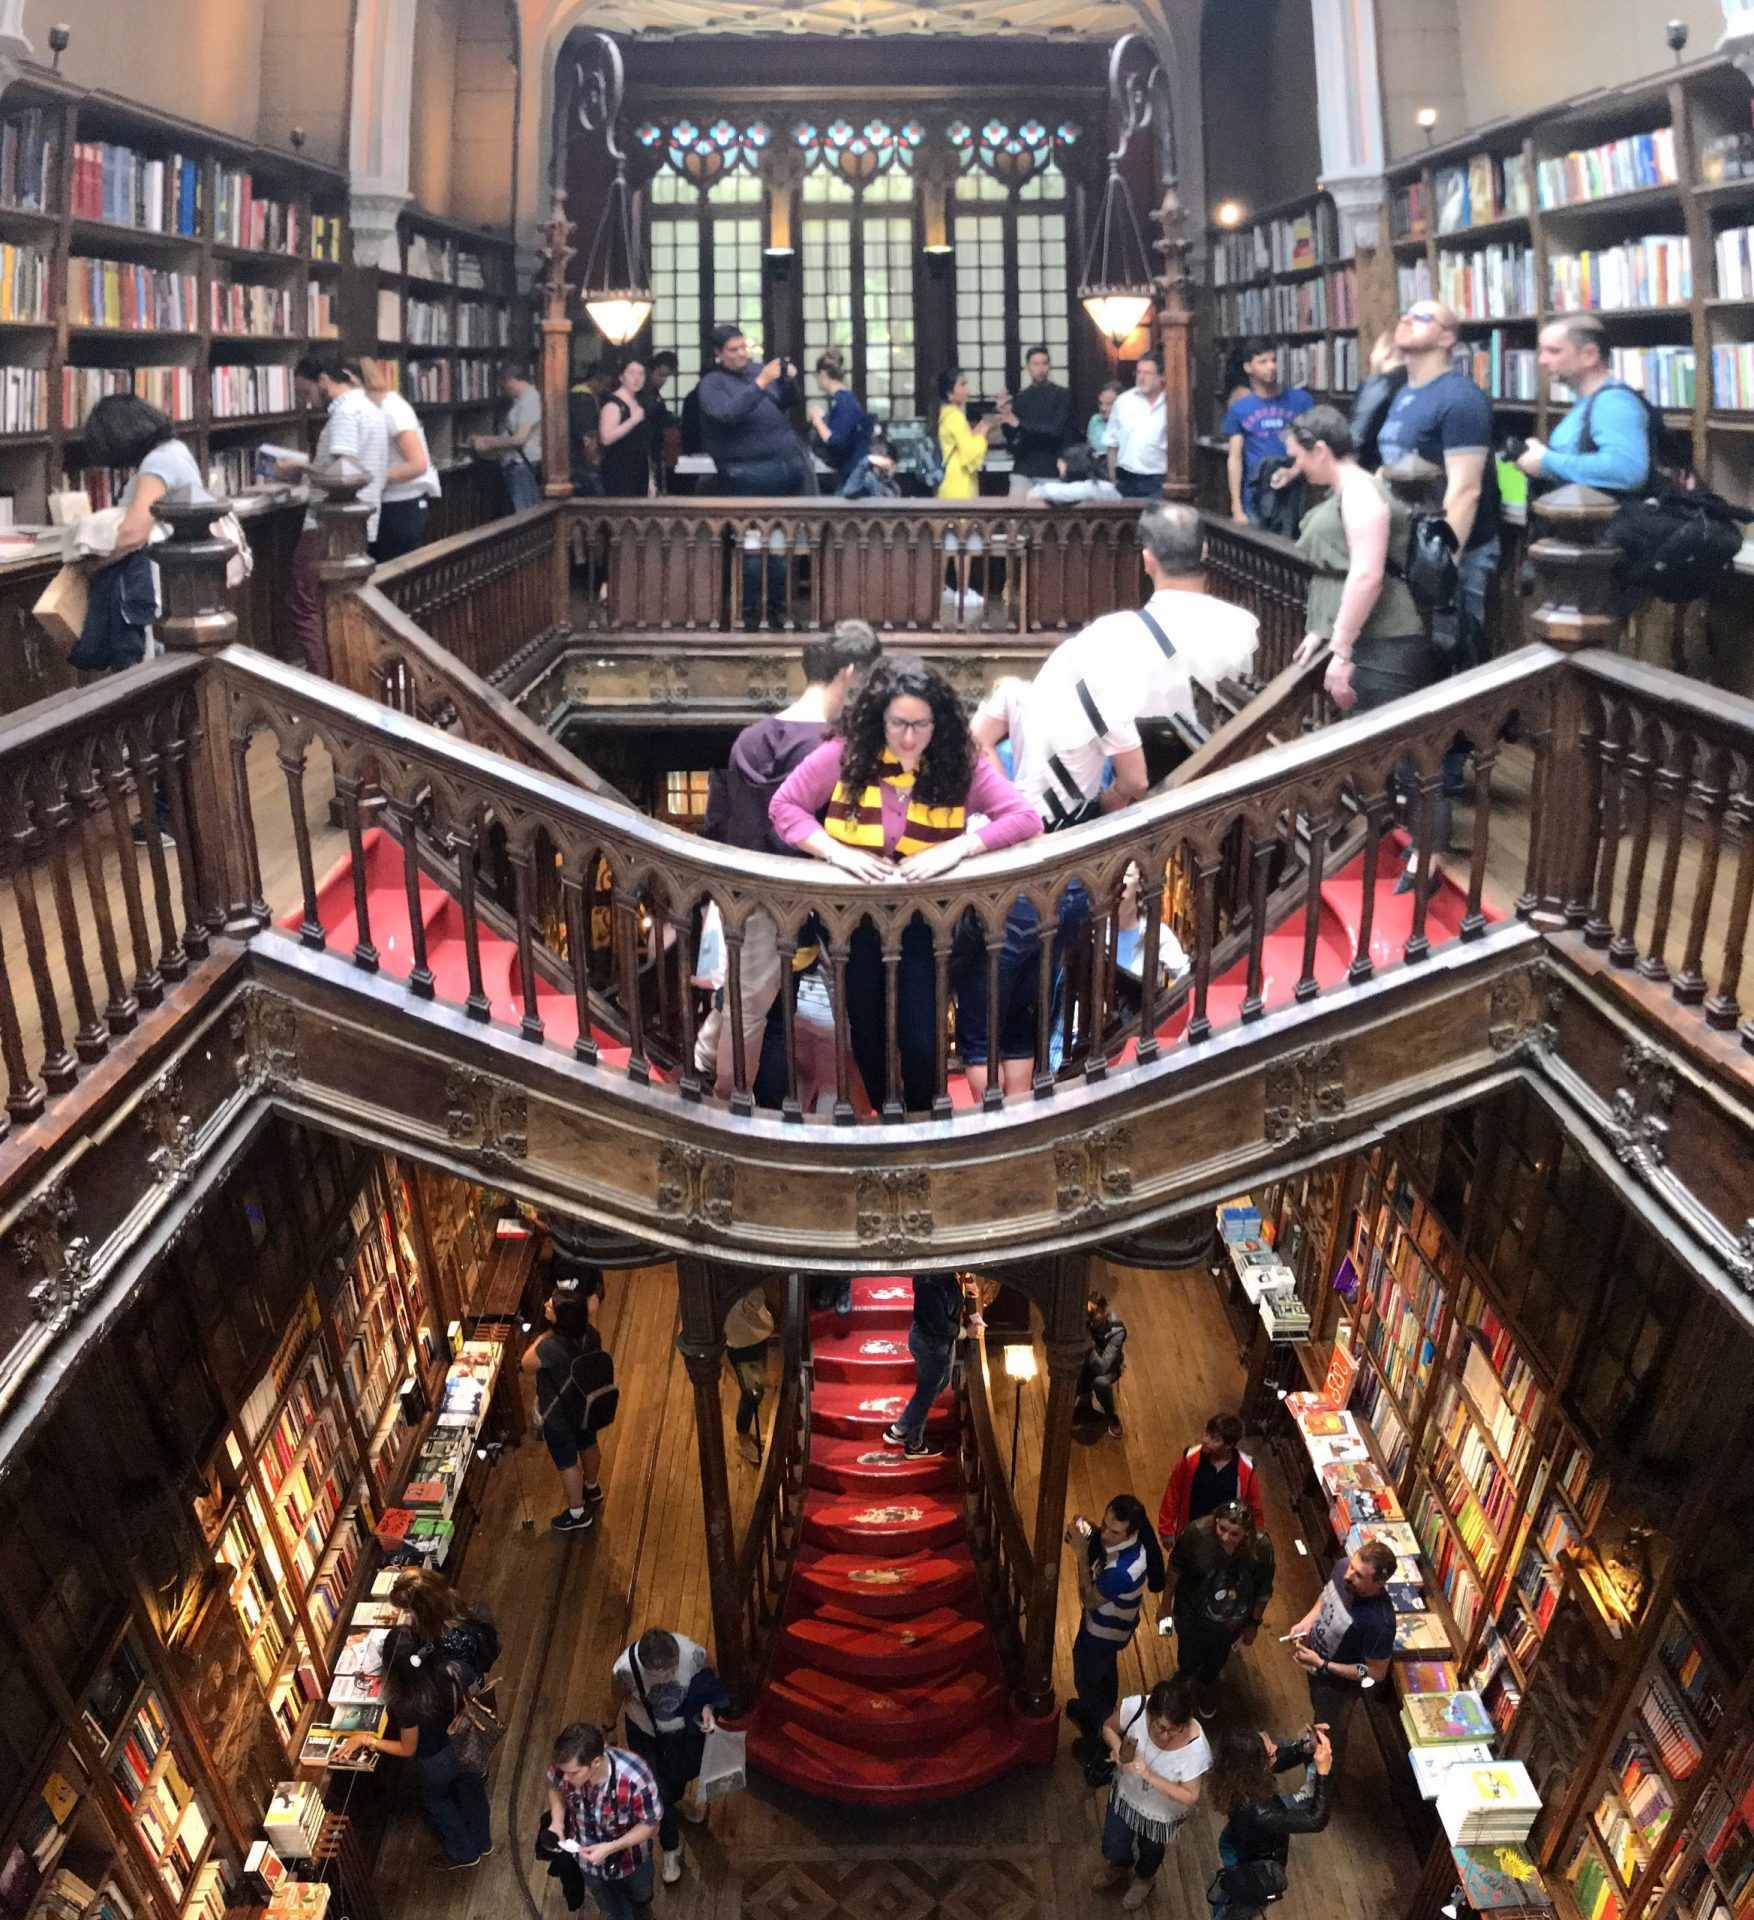 livraria lello bookstore jk rowling harry potter porto scaled - How to Have a Harry Potter & JK Rowling experience in Porto, Portugal